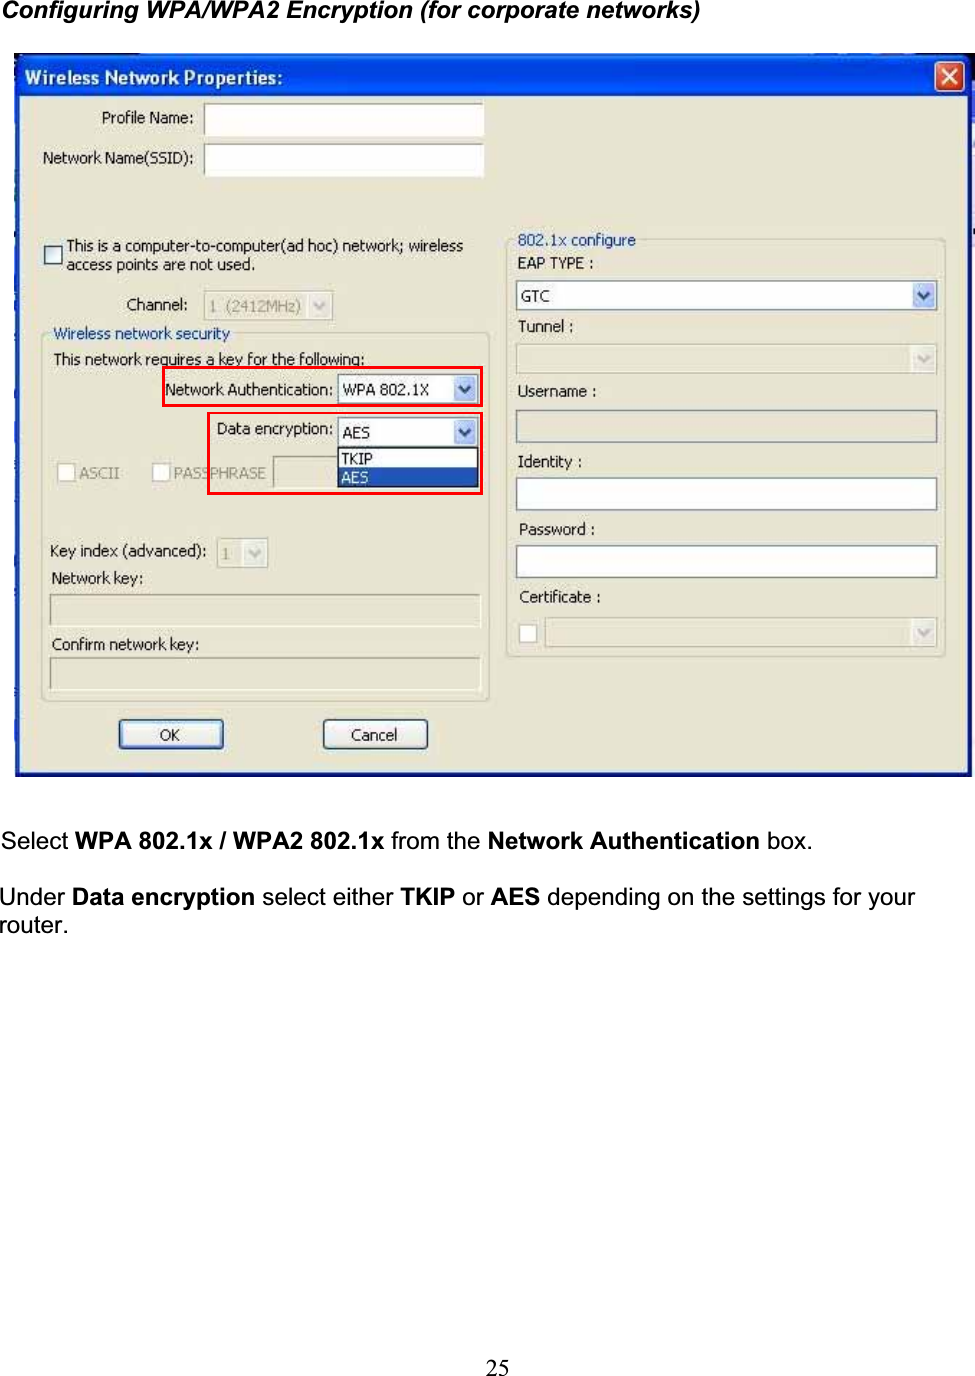 25Configuring WPA/WPA2 Encryption (for corporate networks)Select WPA 802.1x / WPA2 802.1x from the Network Authentication box.Under Data encryption select either TKIP or AES depending on the settings for yourrouter.